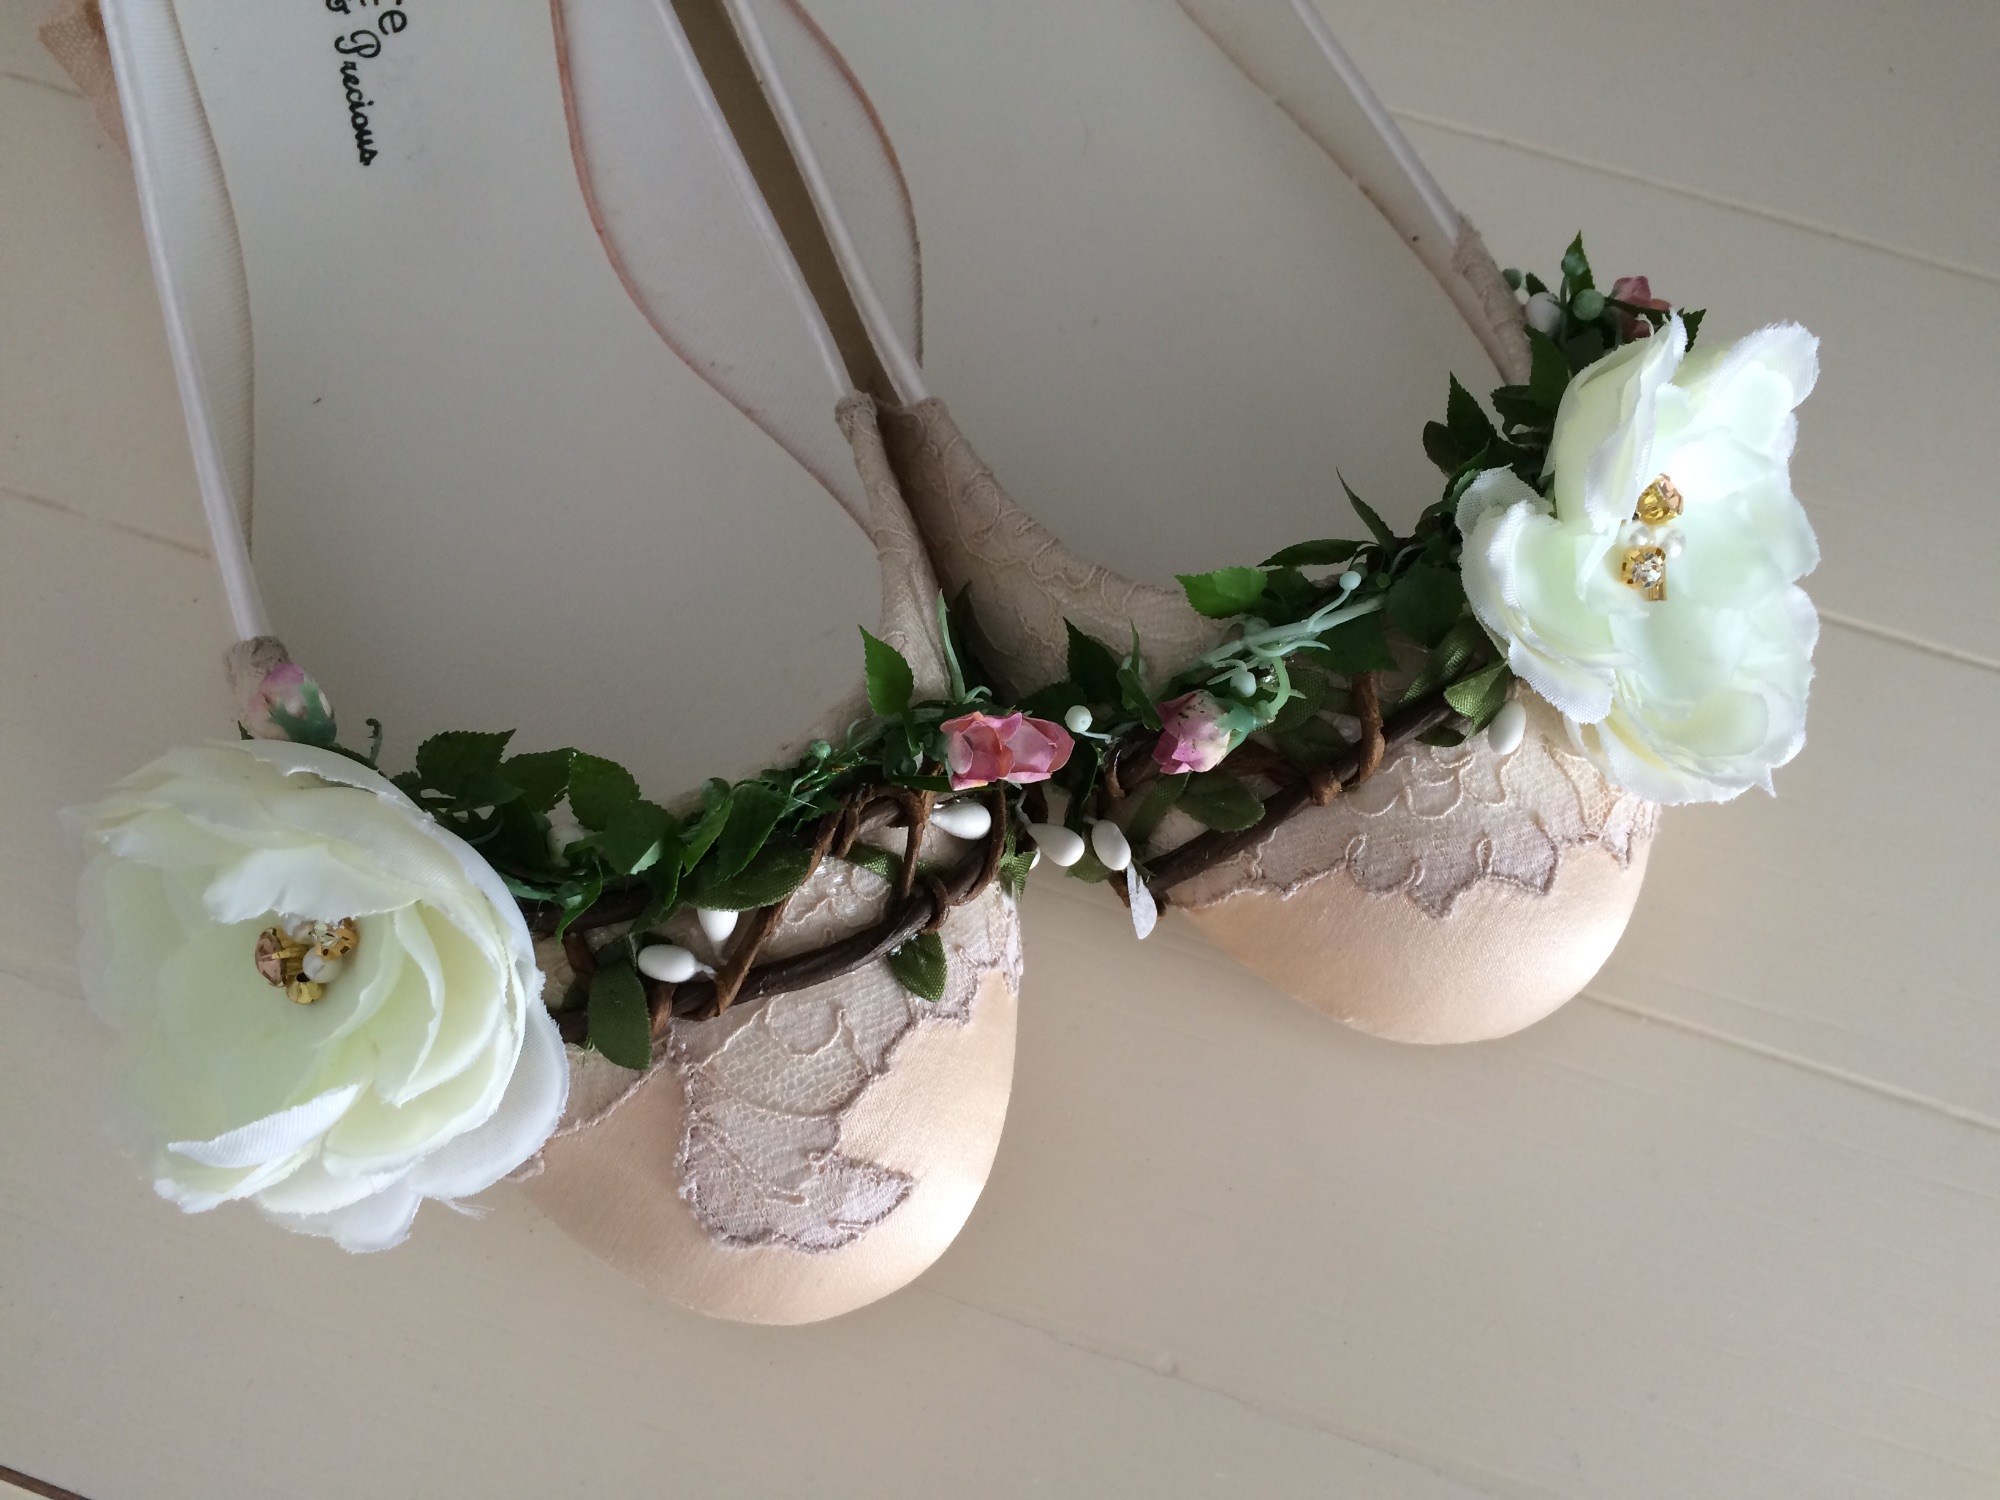 custom flat shoes by lace and love. Lace pumps with flowers